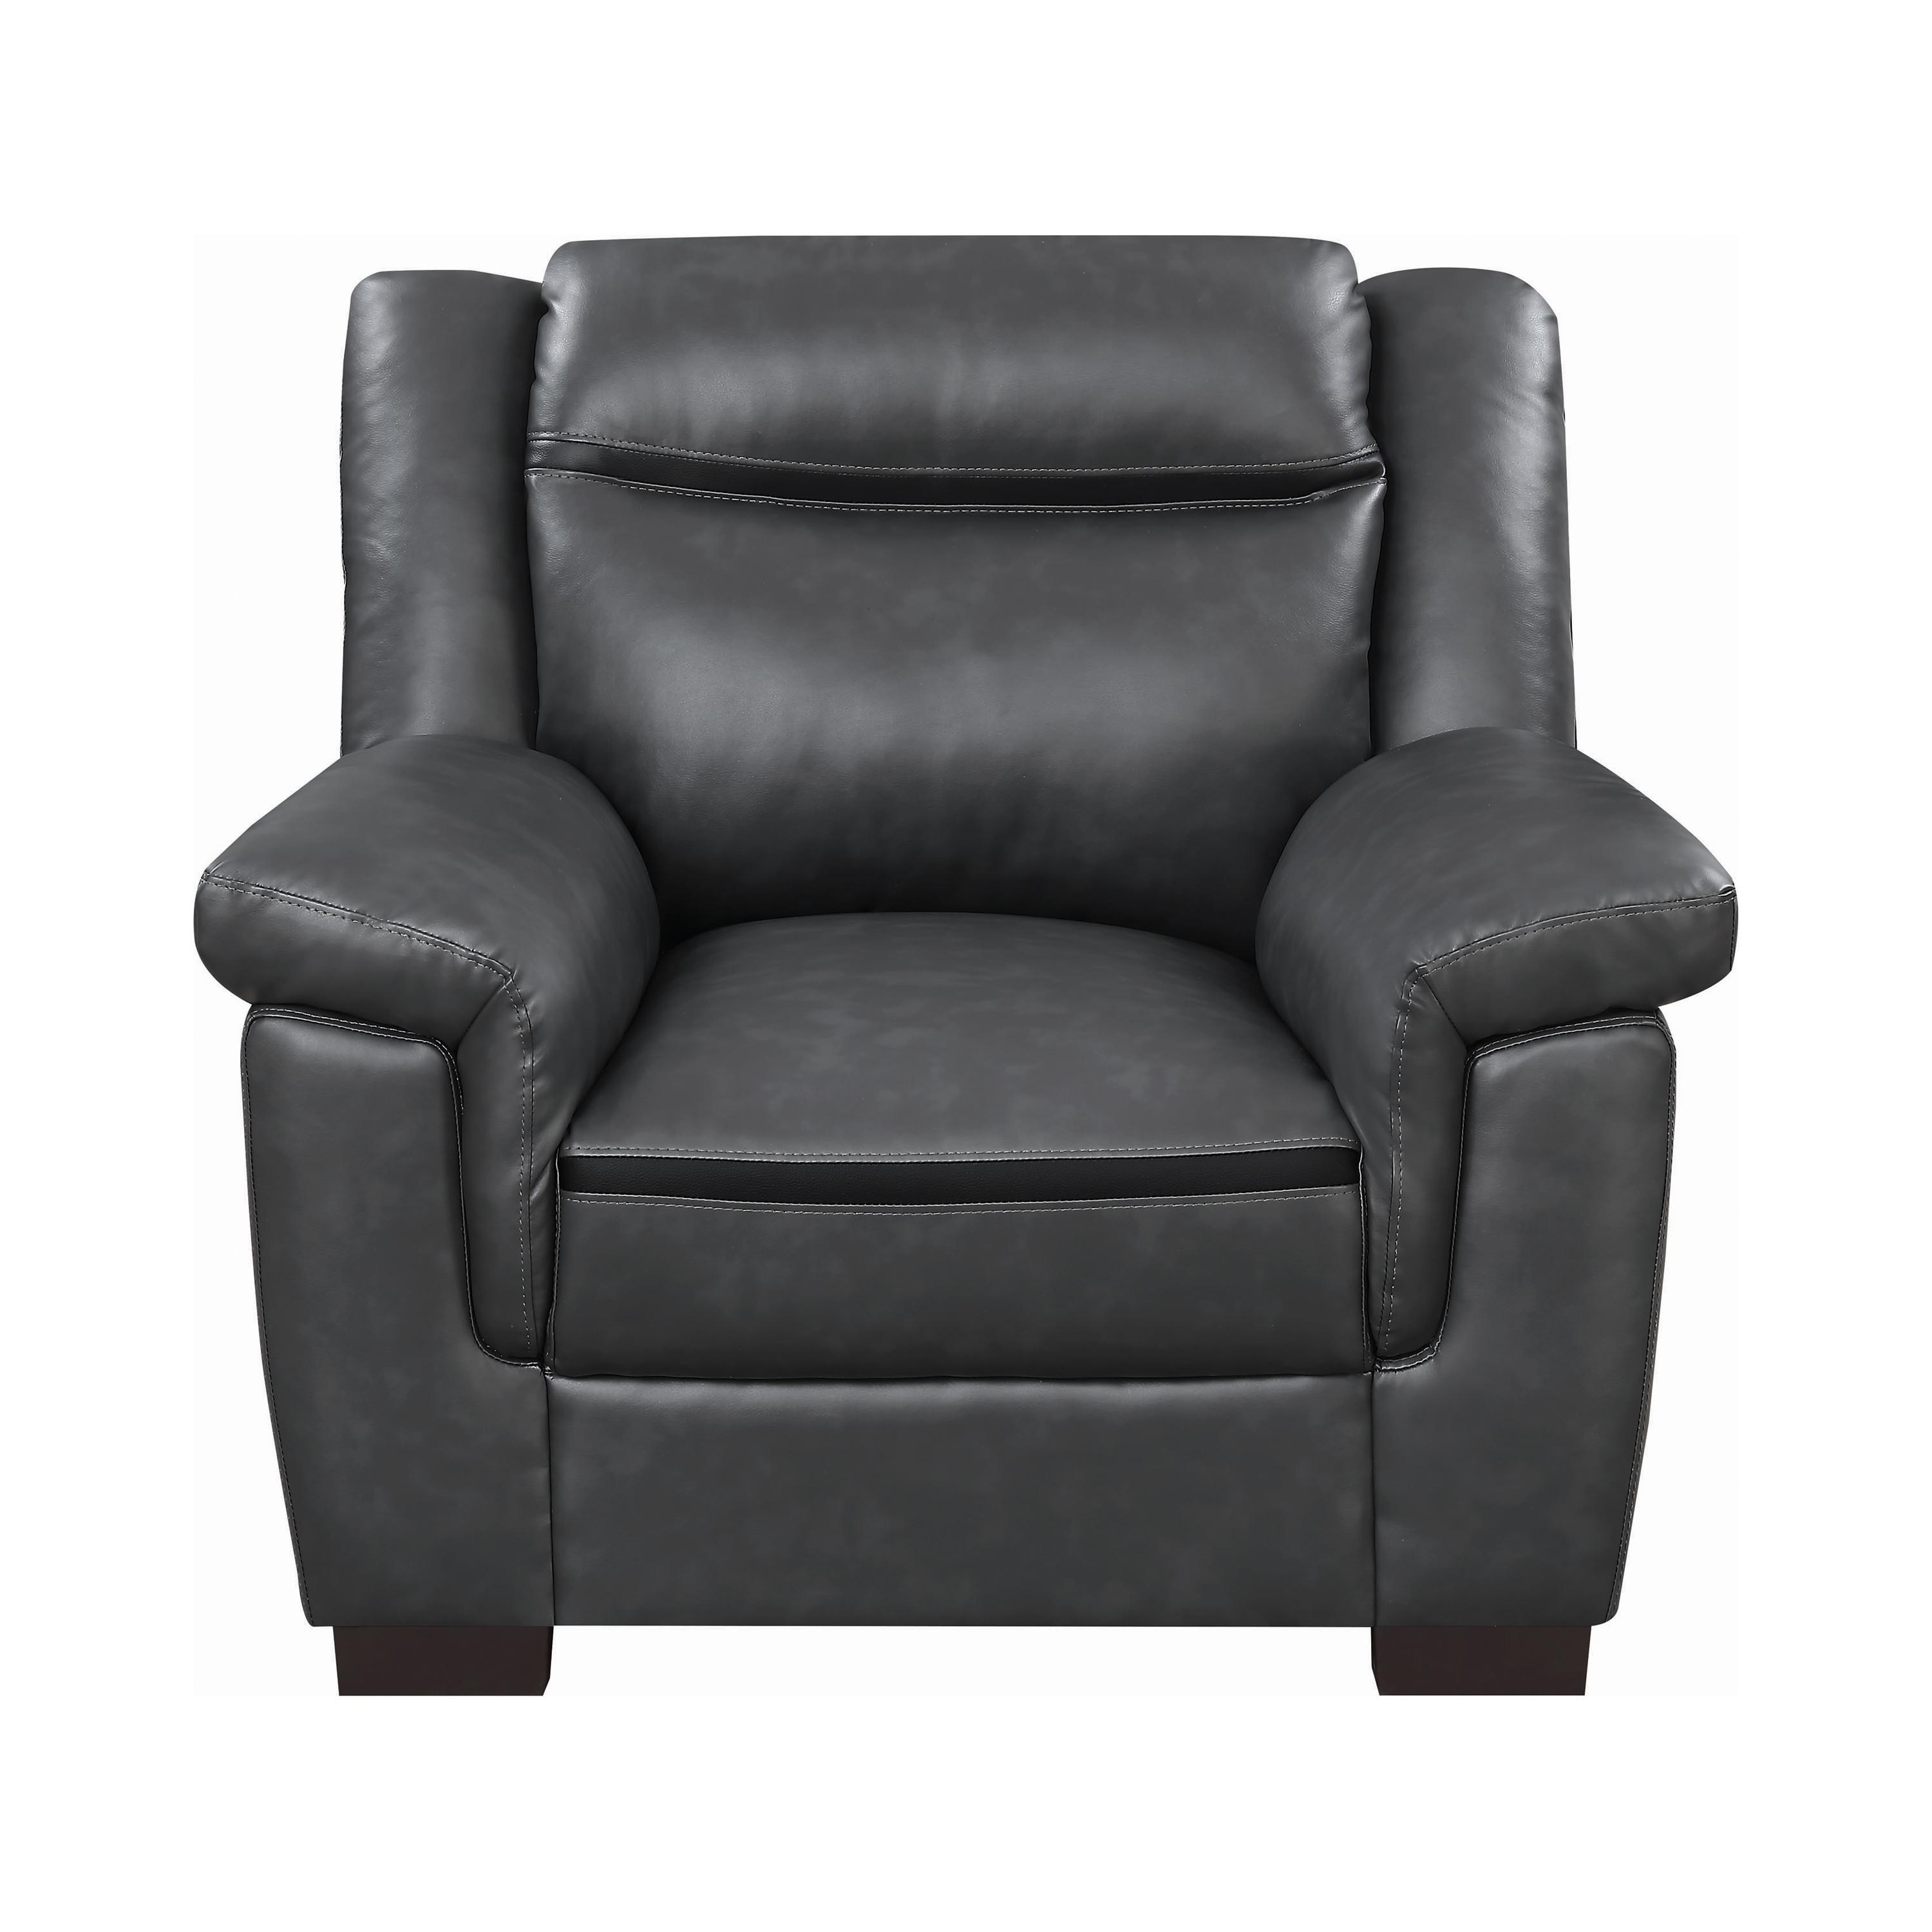 Contemporary Arm Chair 506593 Arabella 506593 in Gray Leatherette